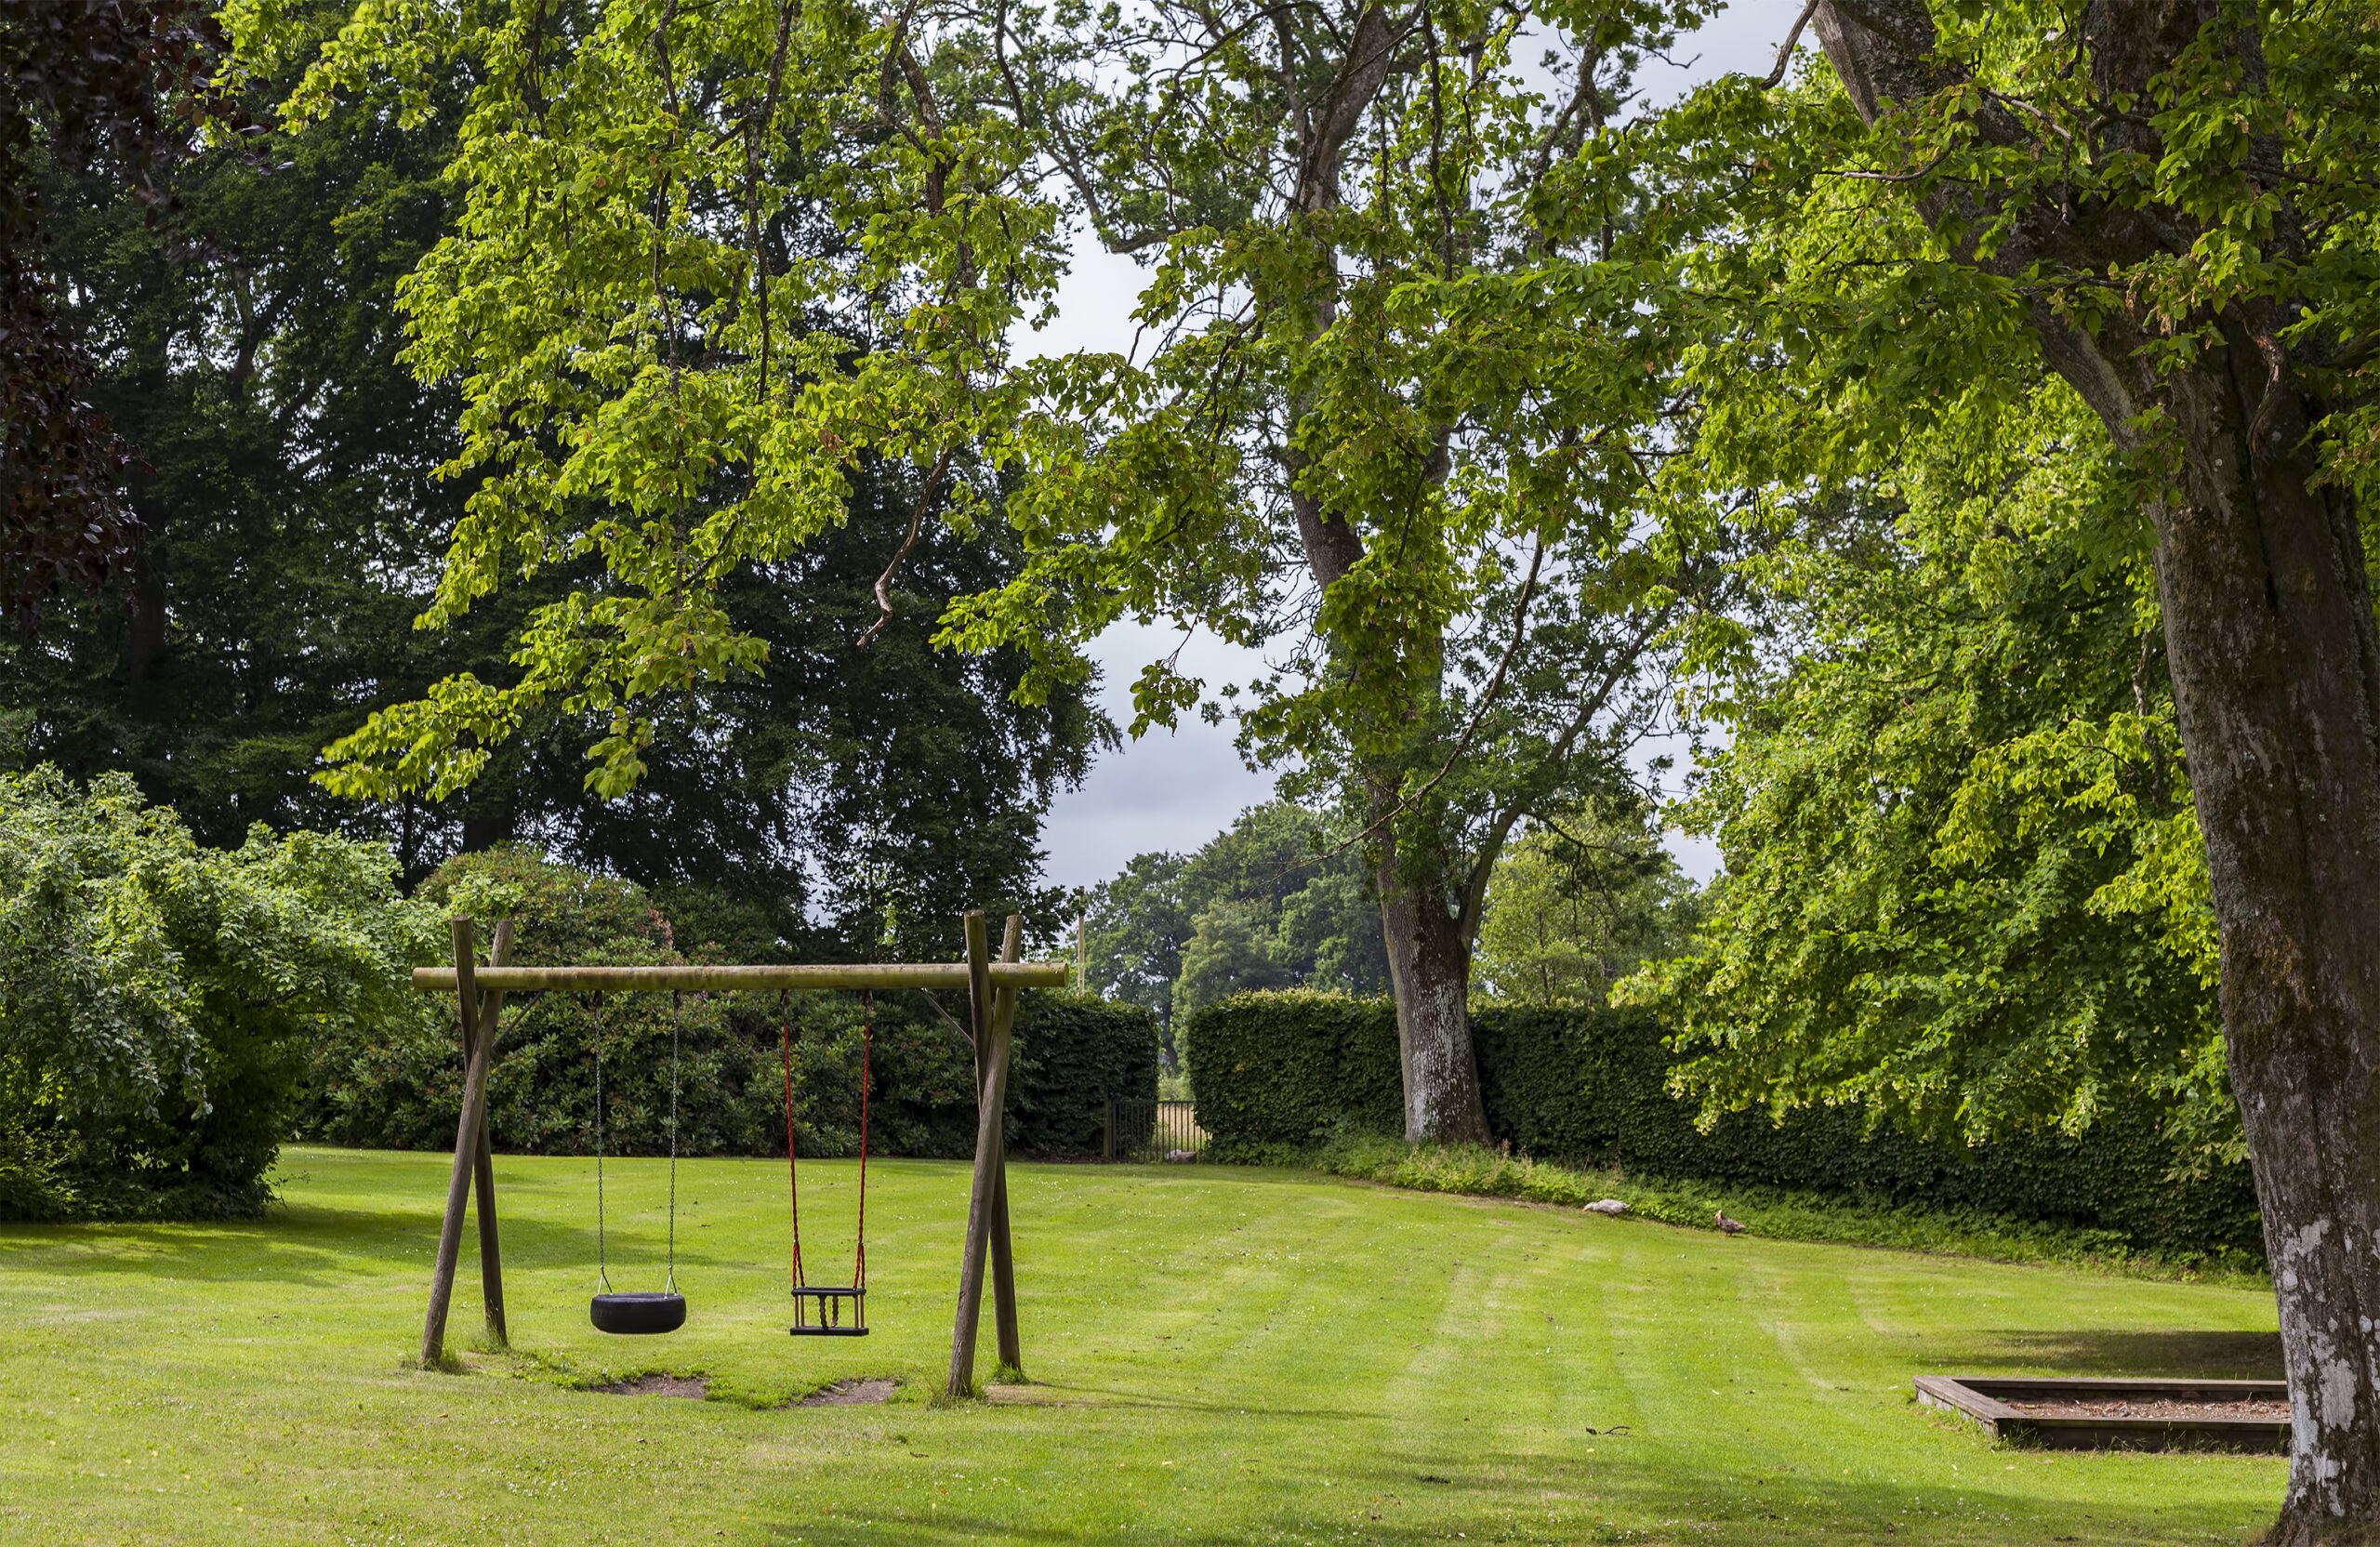 An empty swing set in a lush, green park, suggesting a serene and peaceful play area in a natural setting.